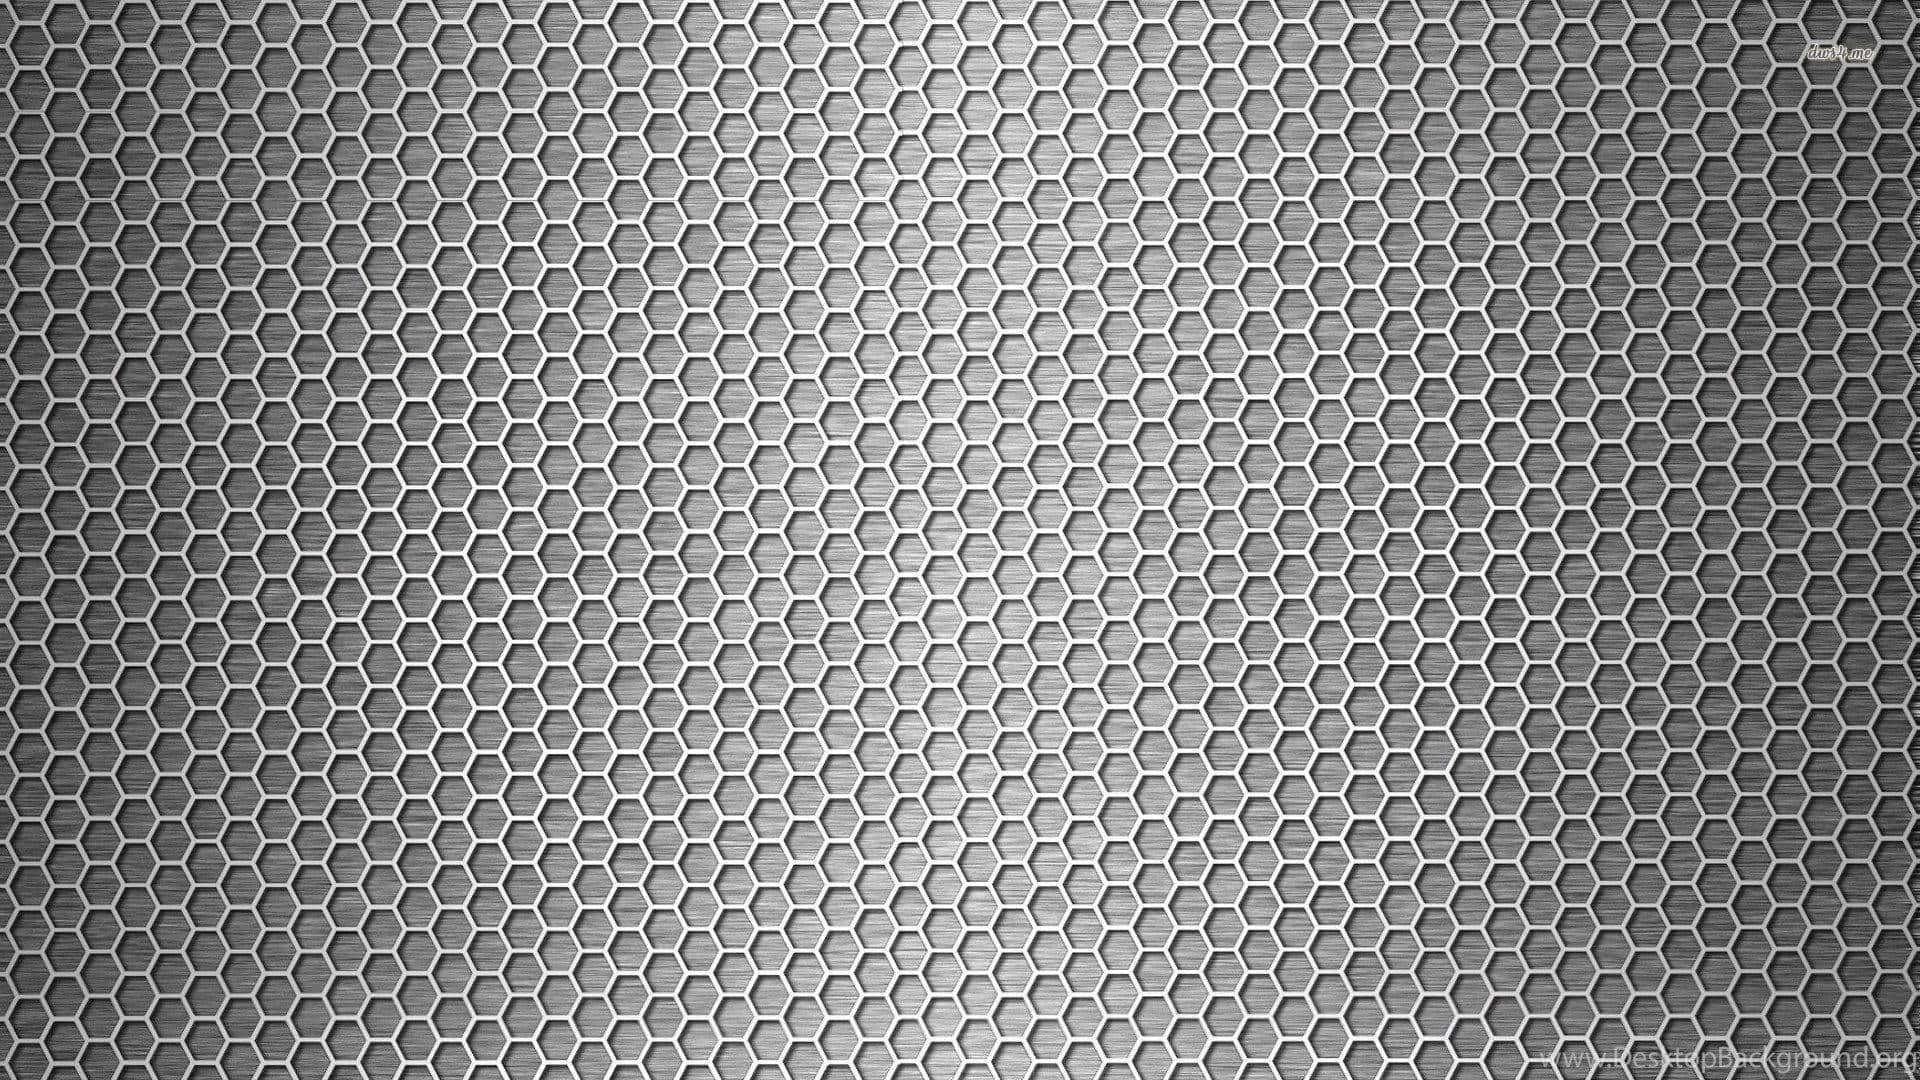 A Black And White Background With A Pattern Of Hexagons Wallpaper